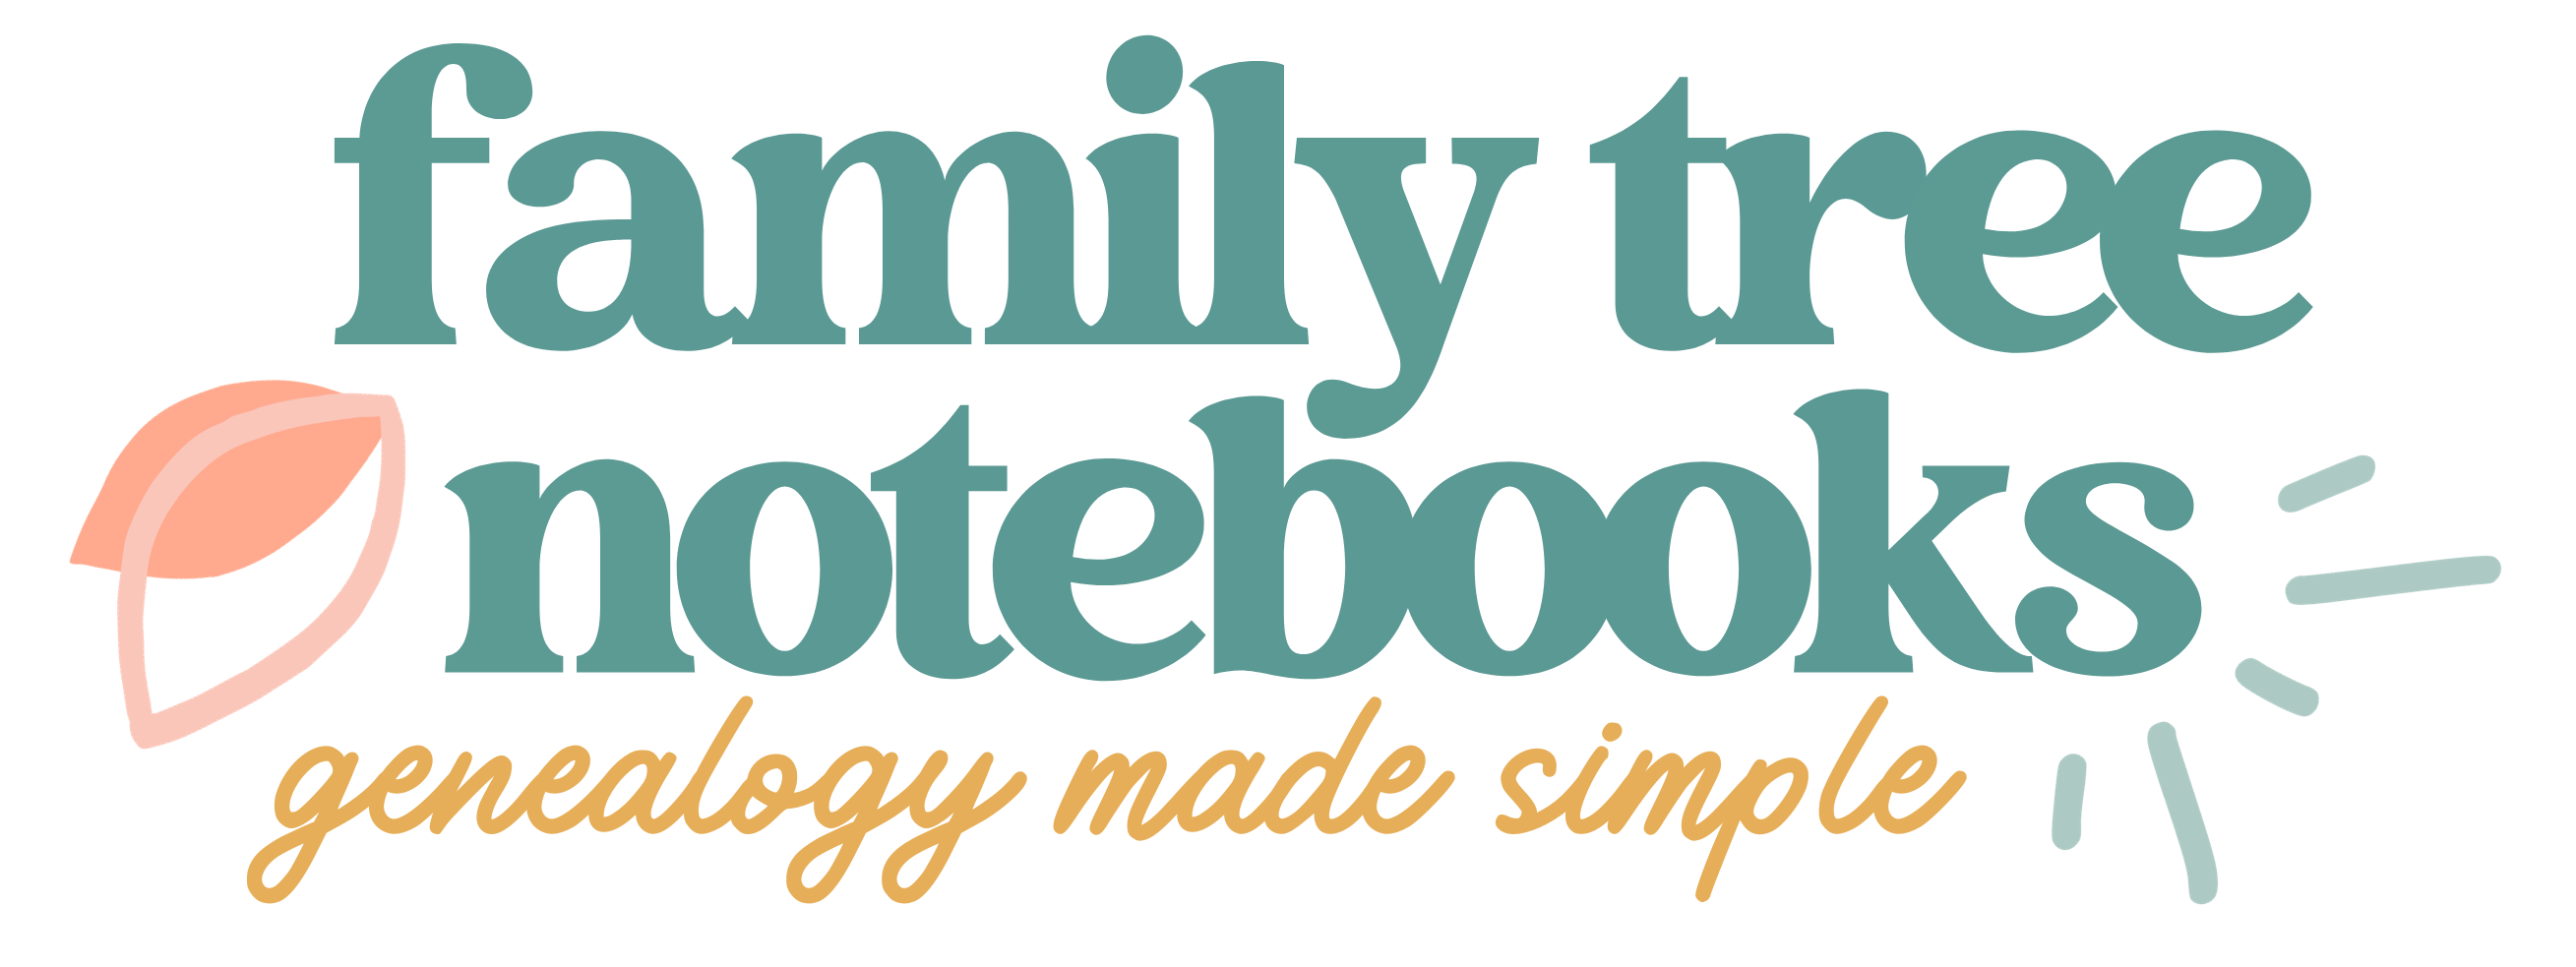 Buying and Downloading Pages from Family Tree Notebooks 